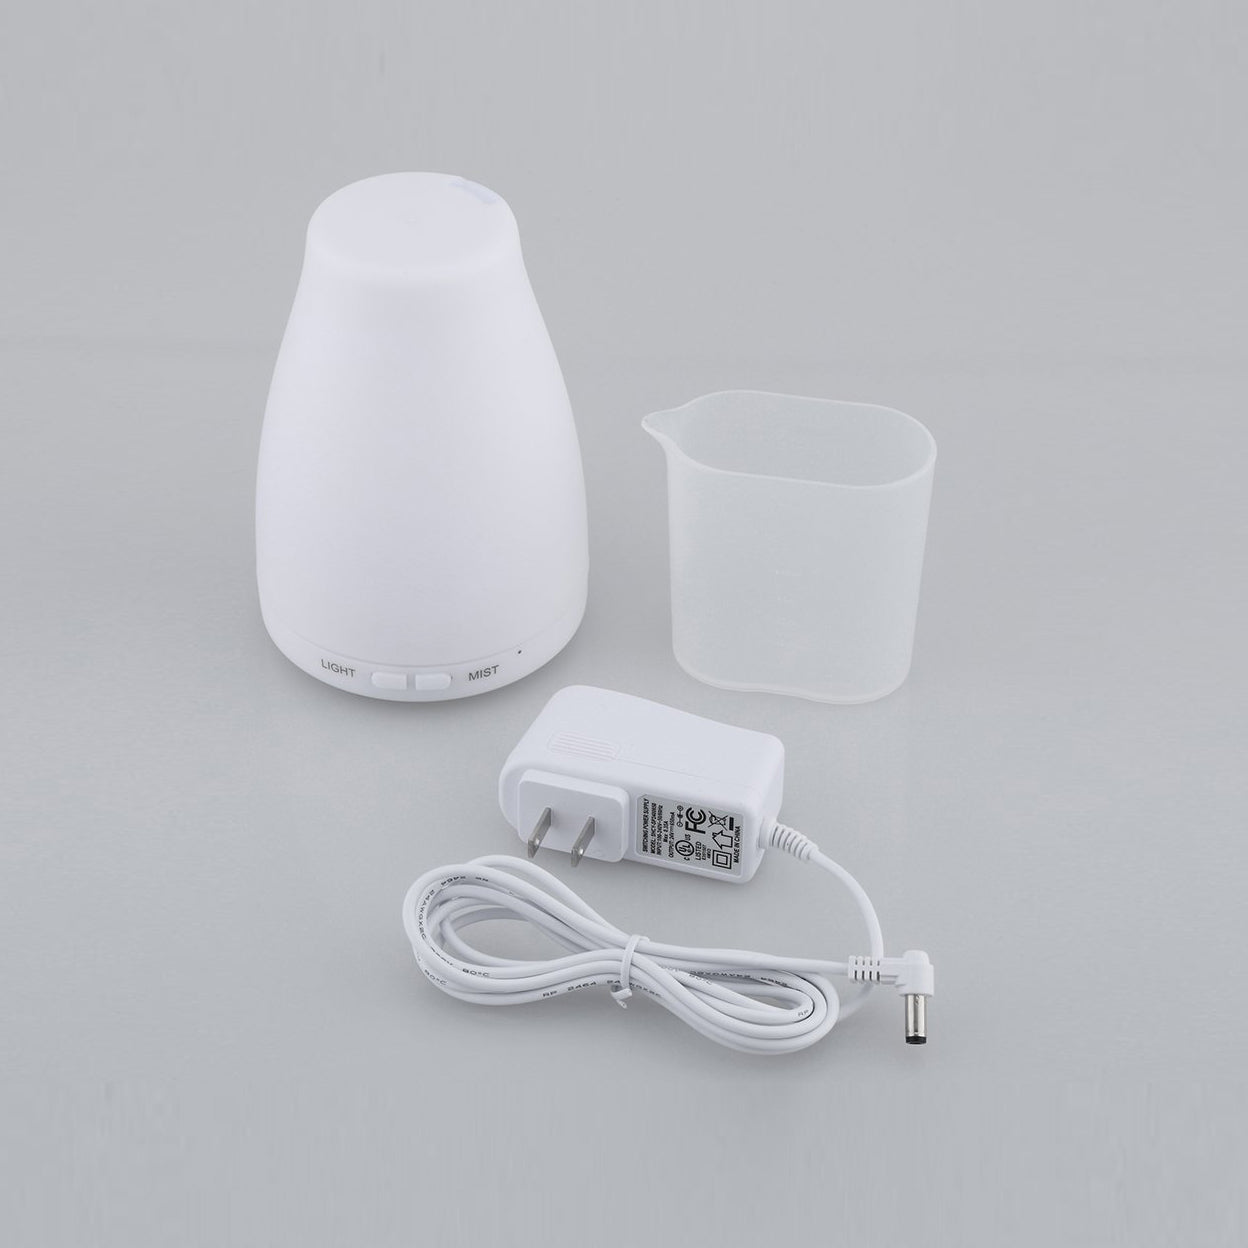  Misty Mood Maker Humidifier With Aroma Essential Oil Free by VistaShops VistaShops Perfumarie